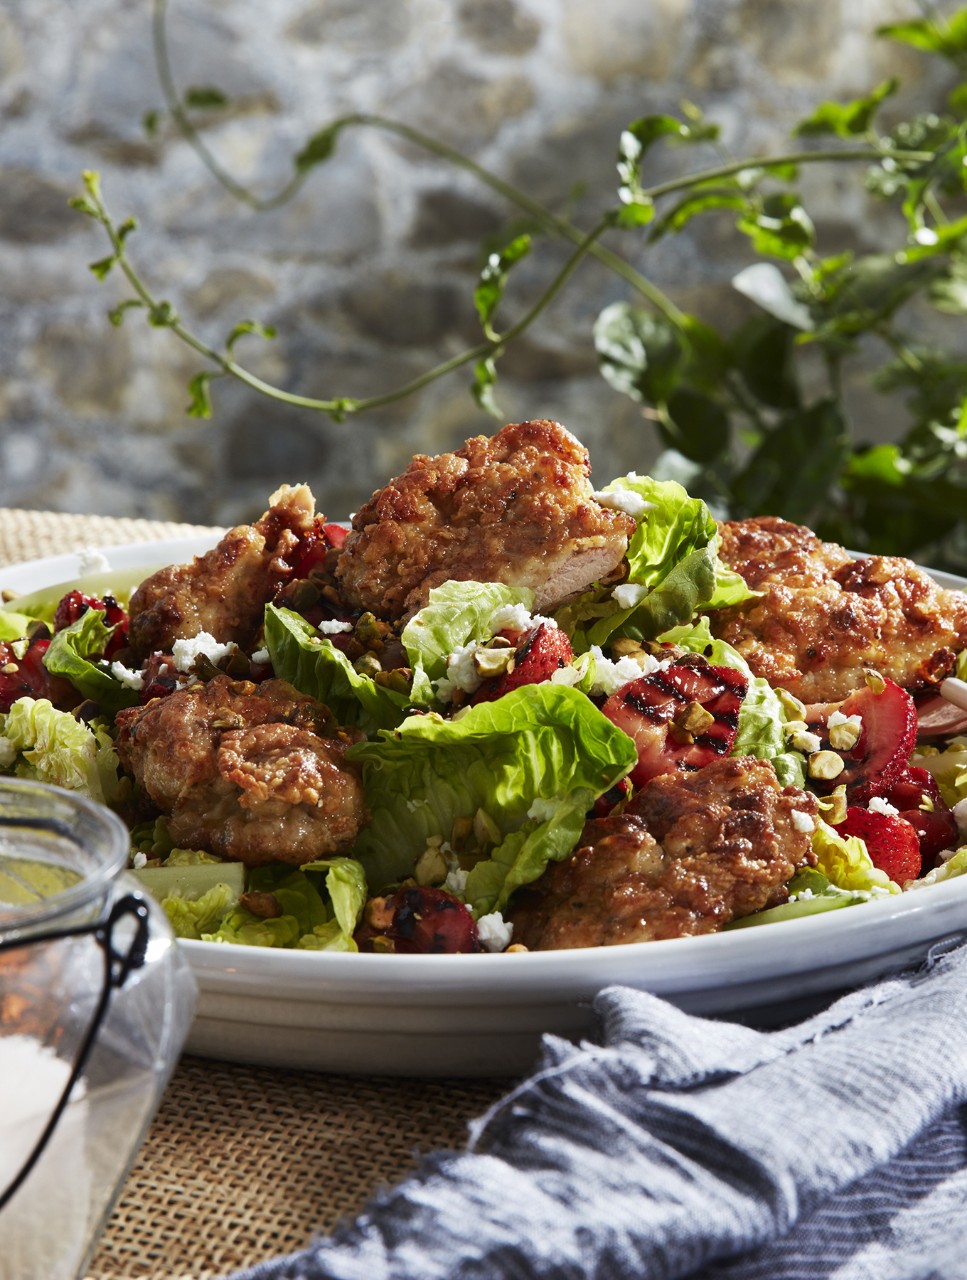 Strawberry Salad with Goat Cheese, Pistachio and Oven-Fried Chicken Thighs